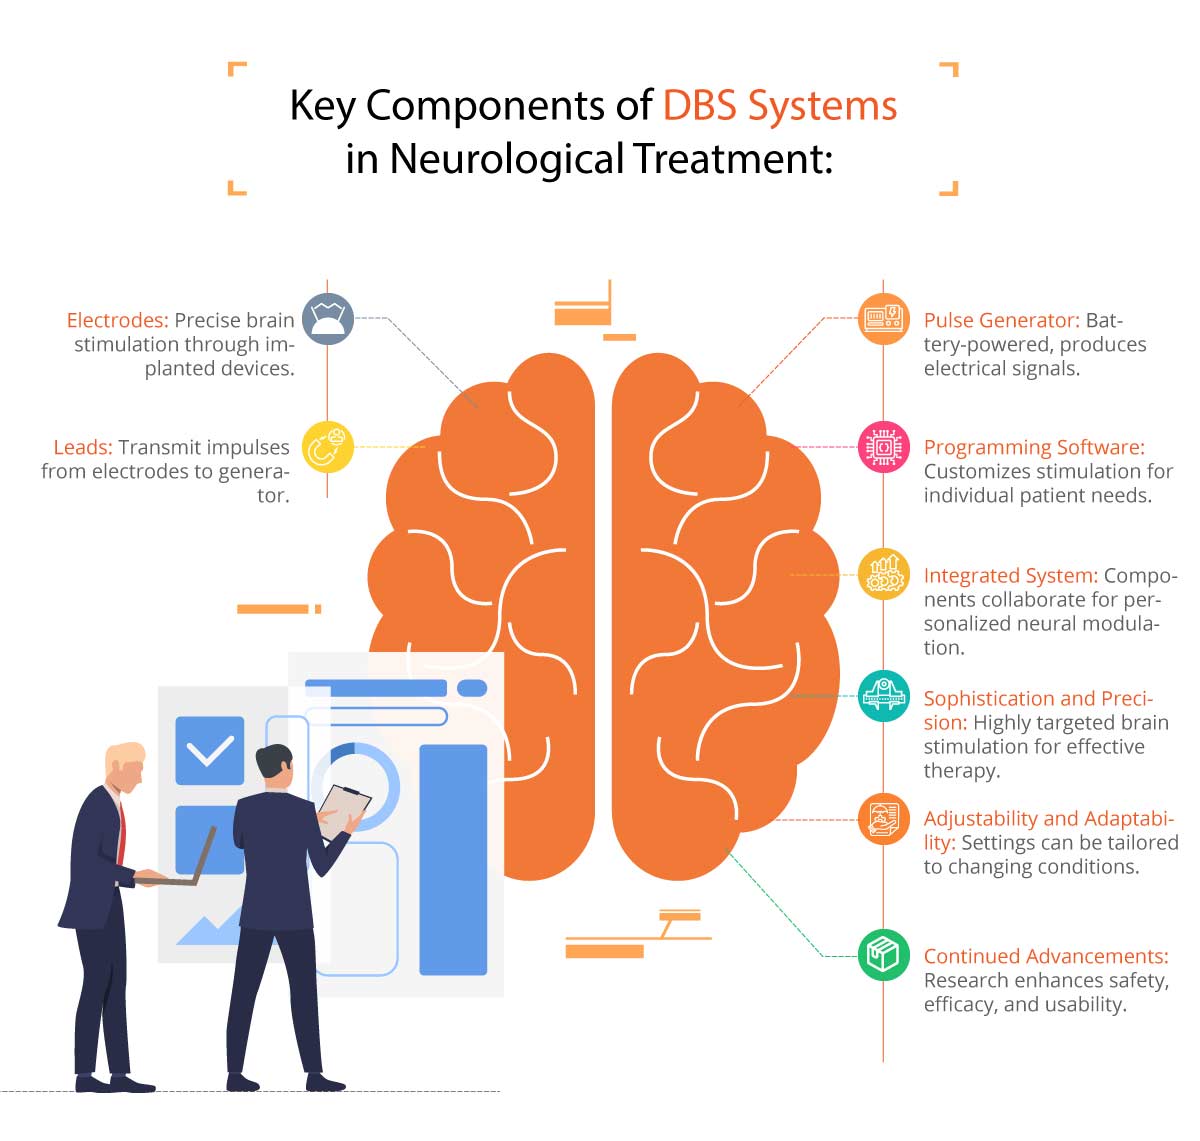 Advancements and Potential of Deep Brain Stimulation Systems in Enhancing Neurological Treatment